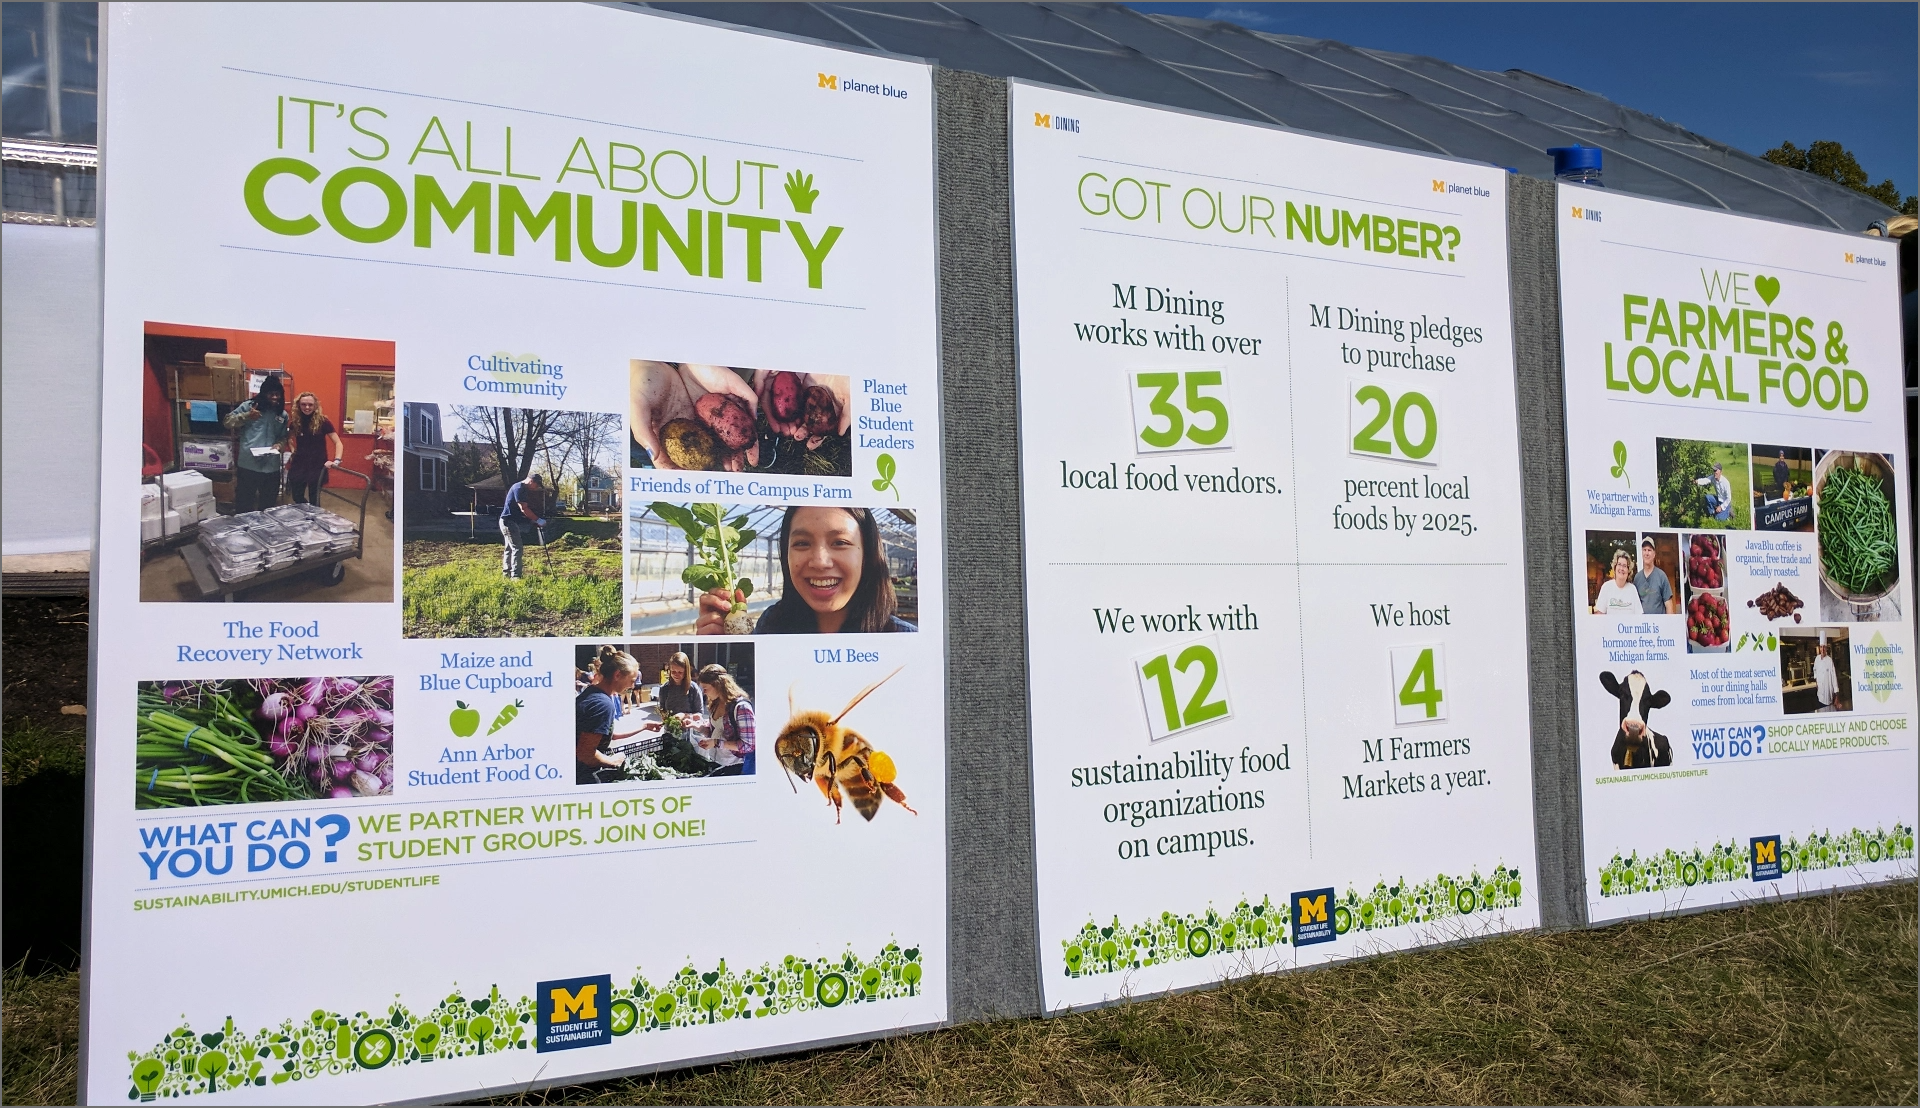 MDining posters describing Community engagement